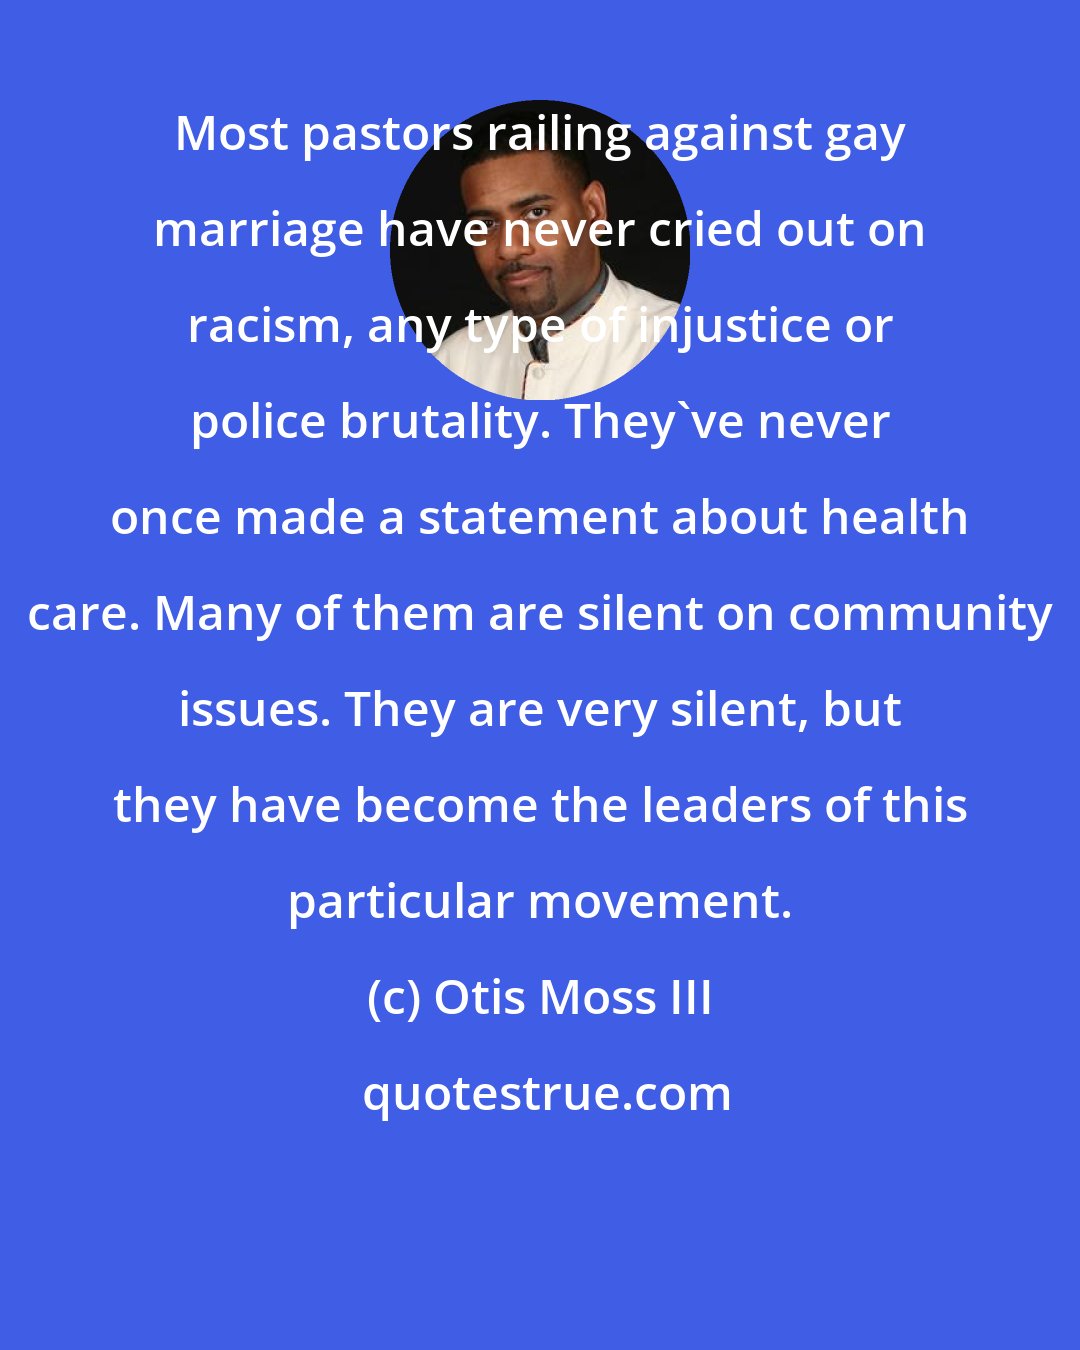 Otis Moss III: Most pastors railing against gay marriage have never cried out on racism, any type of injustice or police brutality. They've never once made a statement about health care. Many of them are silent on community issues. They are very silent, but they have become the leaders of this particular movement.